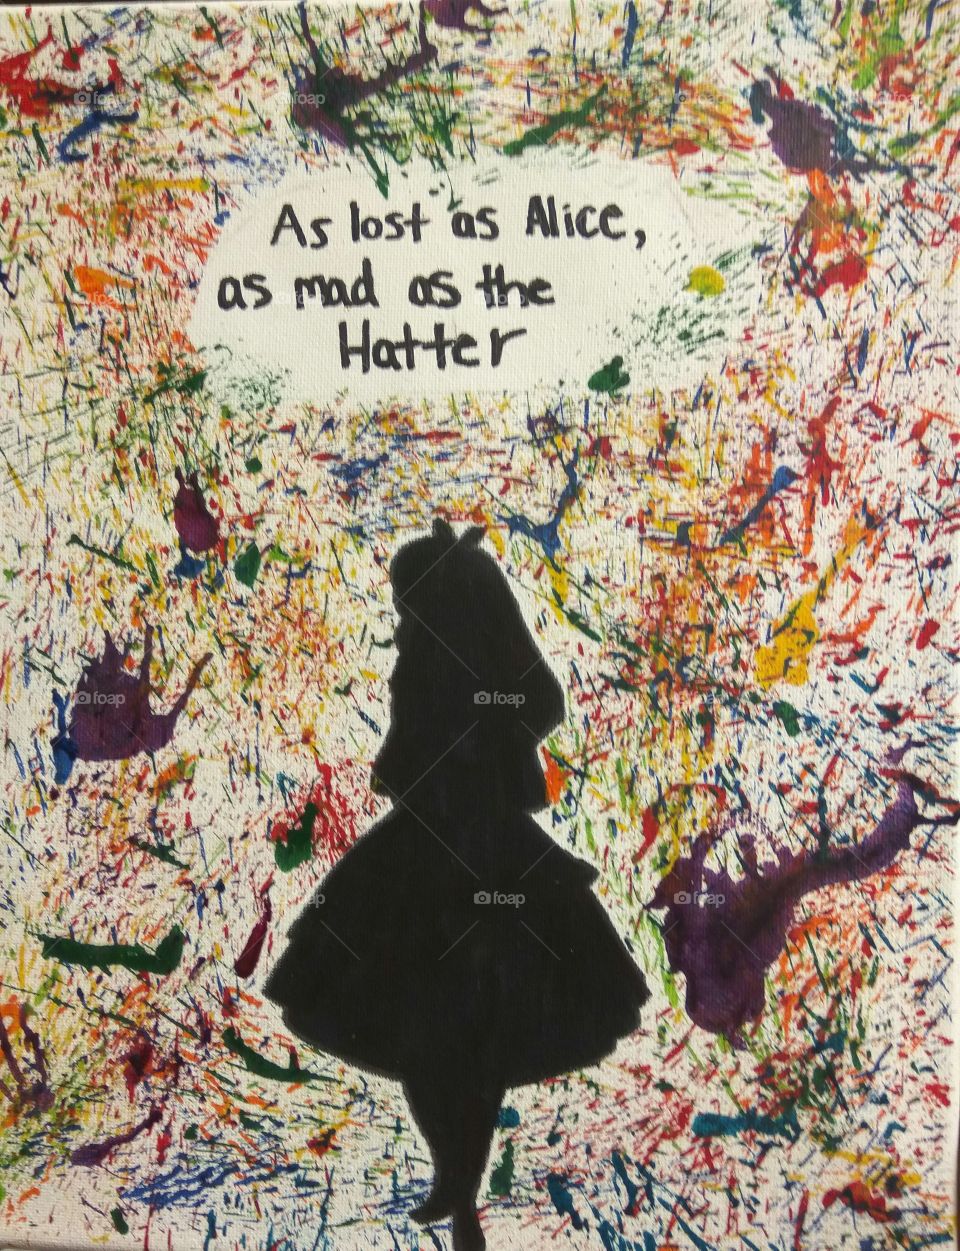 beautiful, colorful, unique, chaos, crayon art, artistic, blow dryer, Alice in wonderland, "as lost as Alice as mad as the hatter"